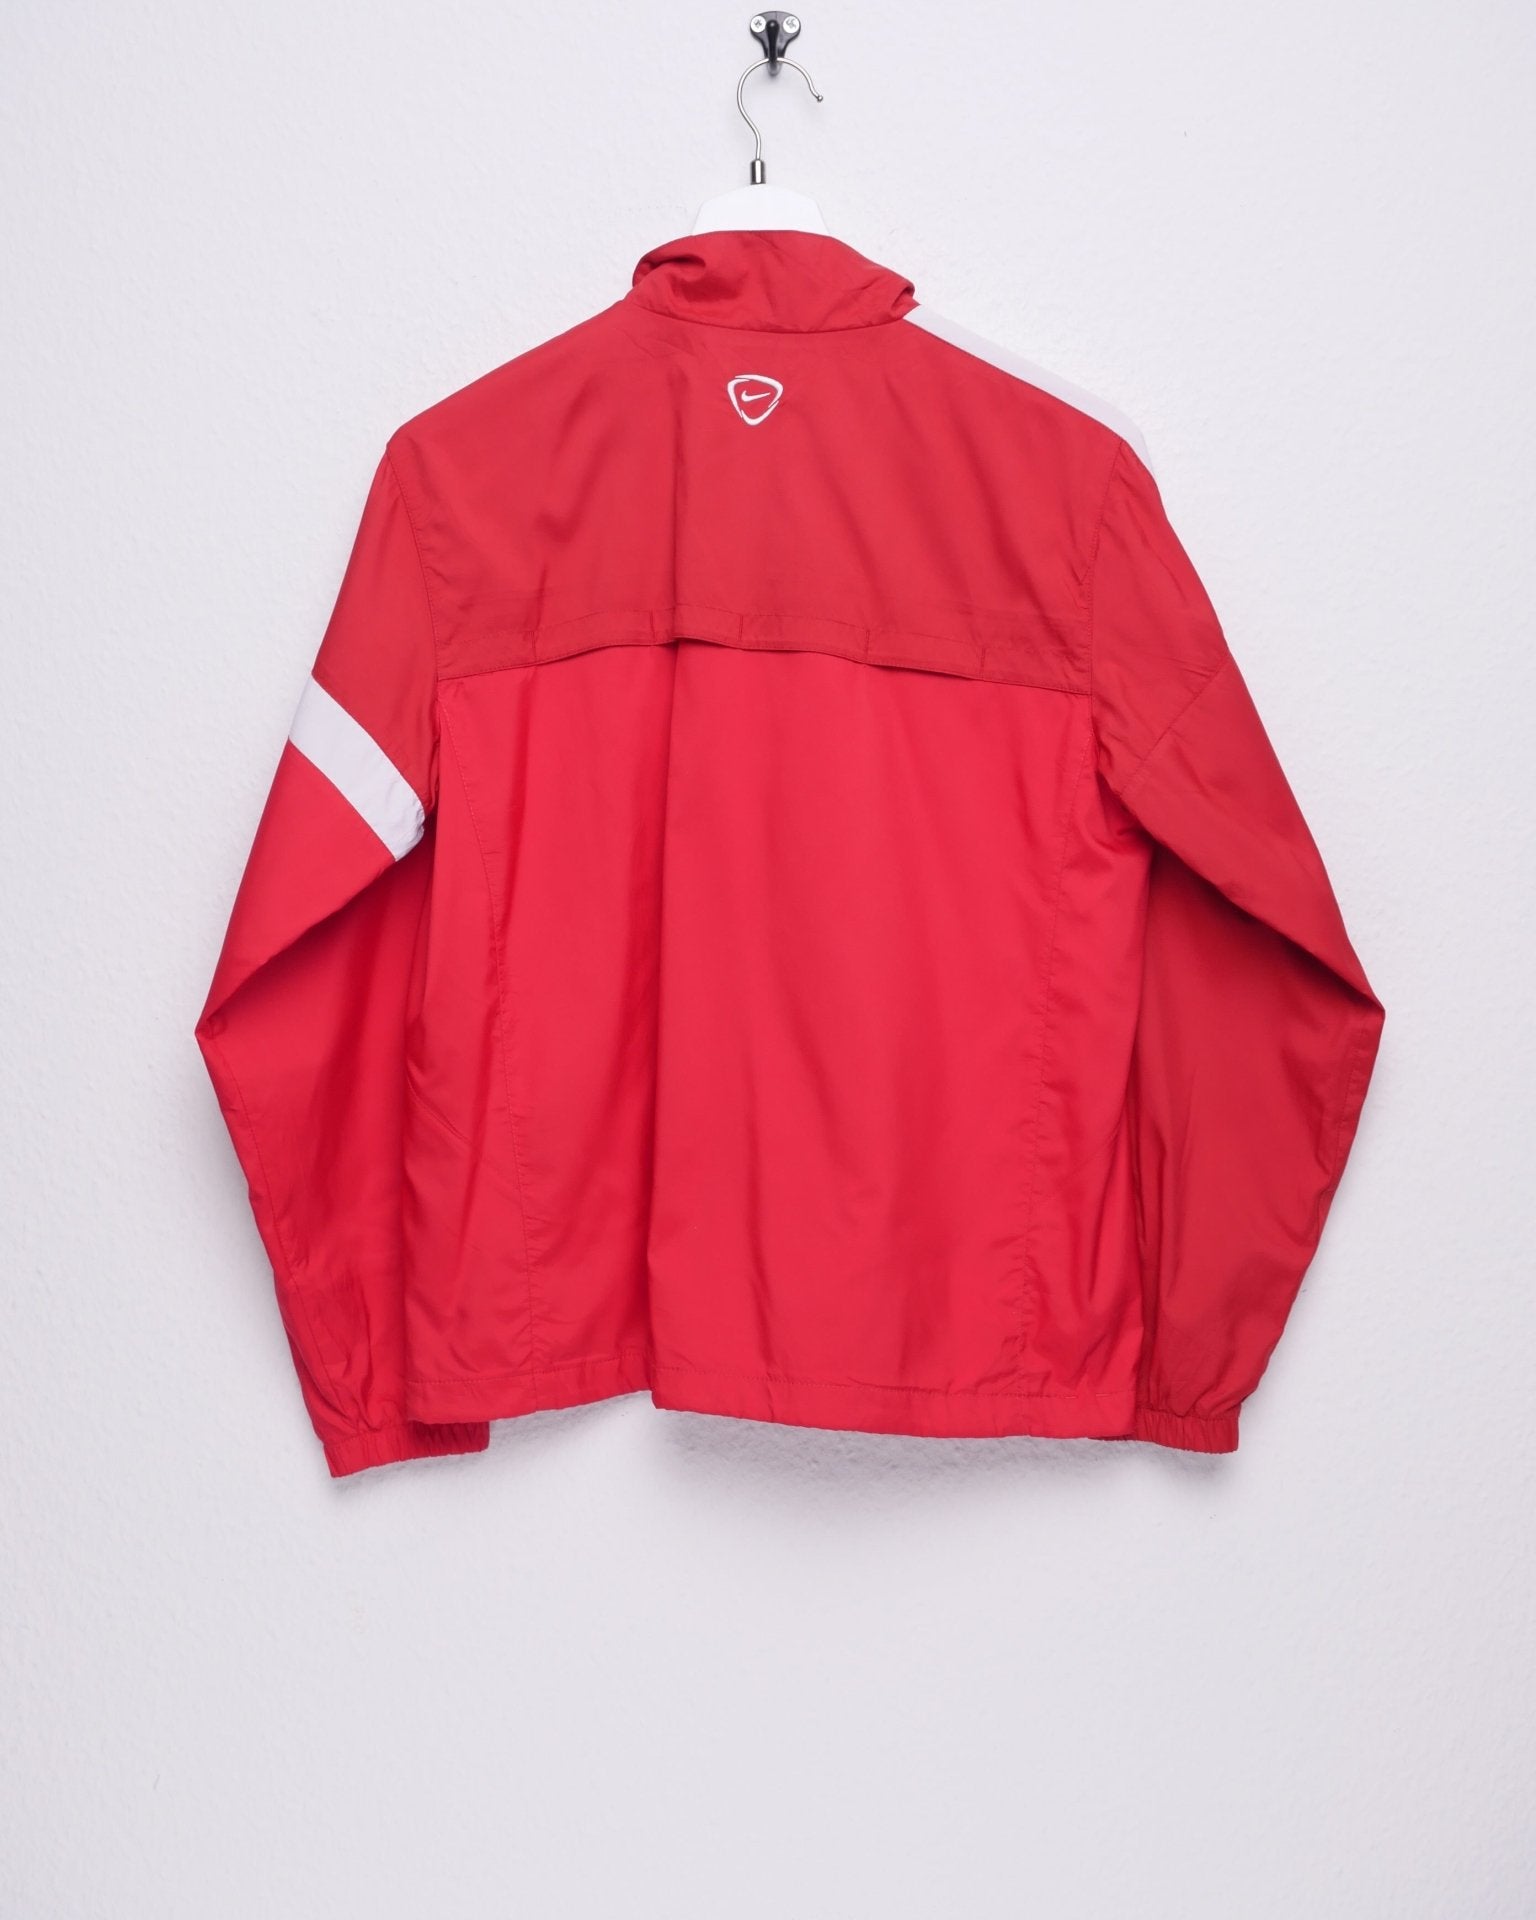 Nike Urano embroidered Logo red Track Jacket - Peeces